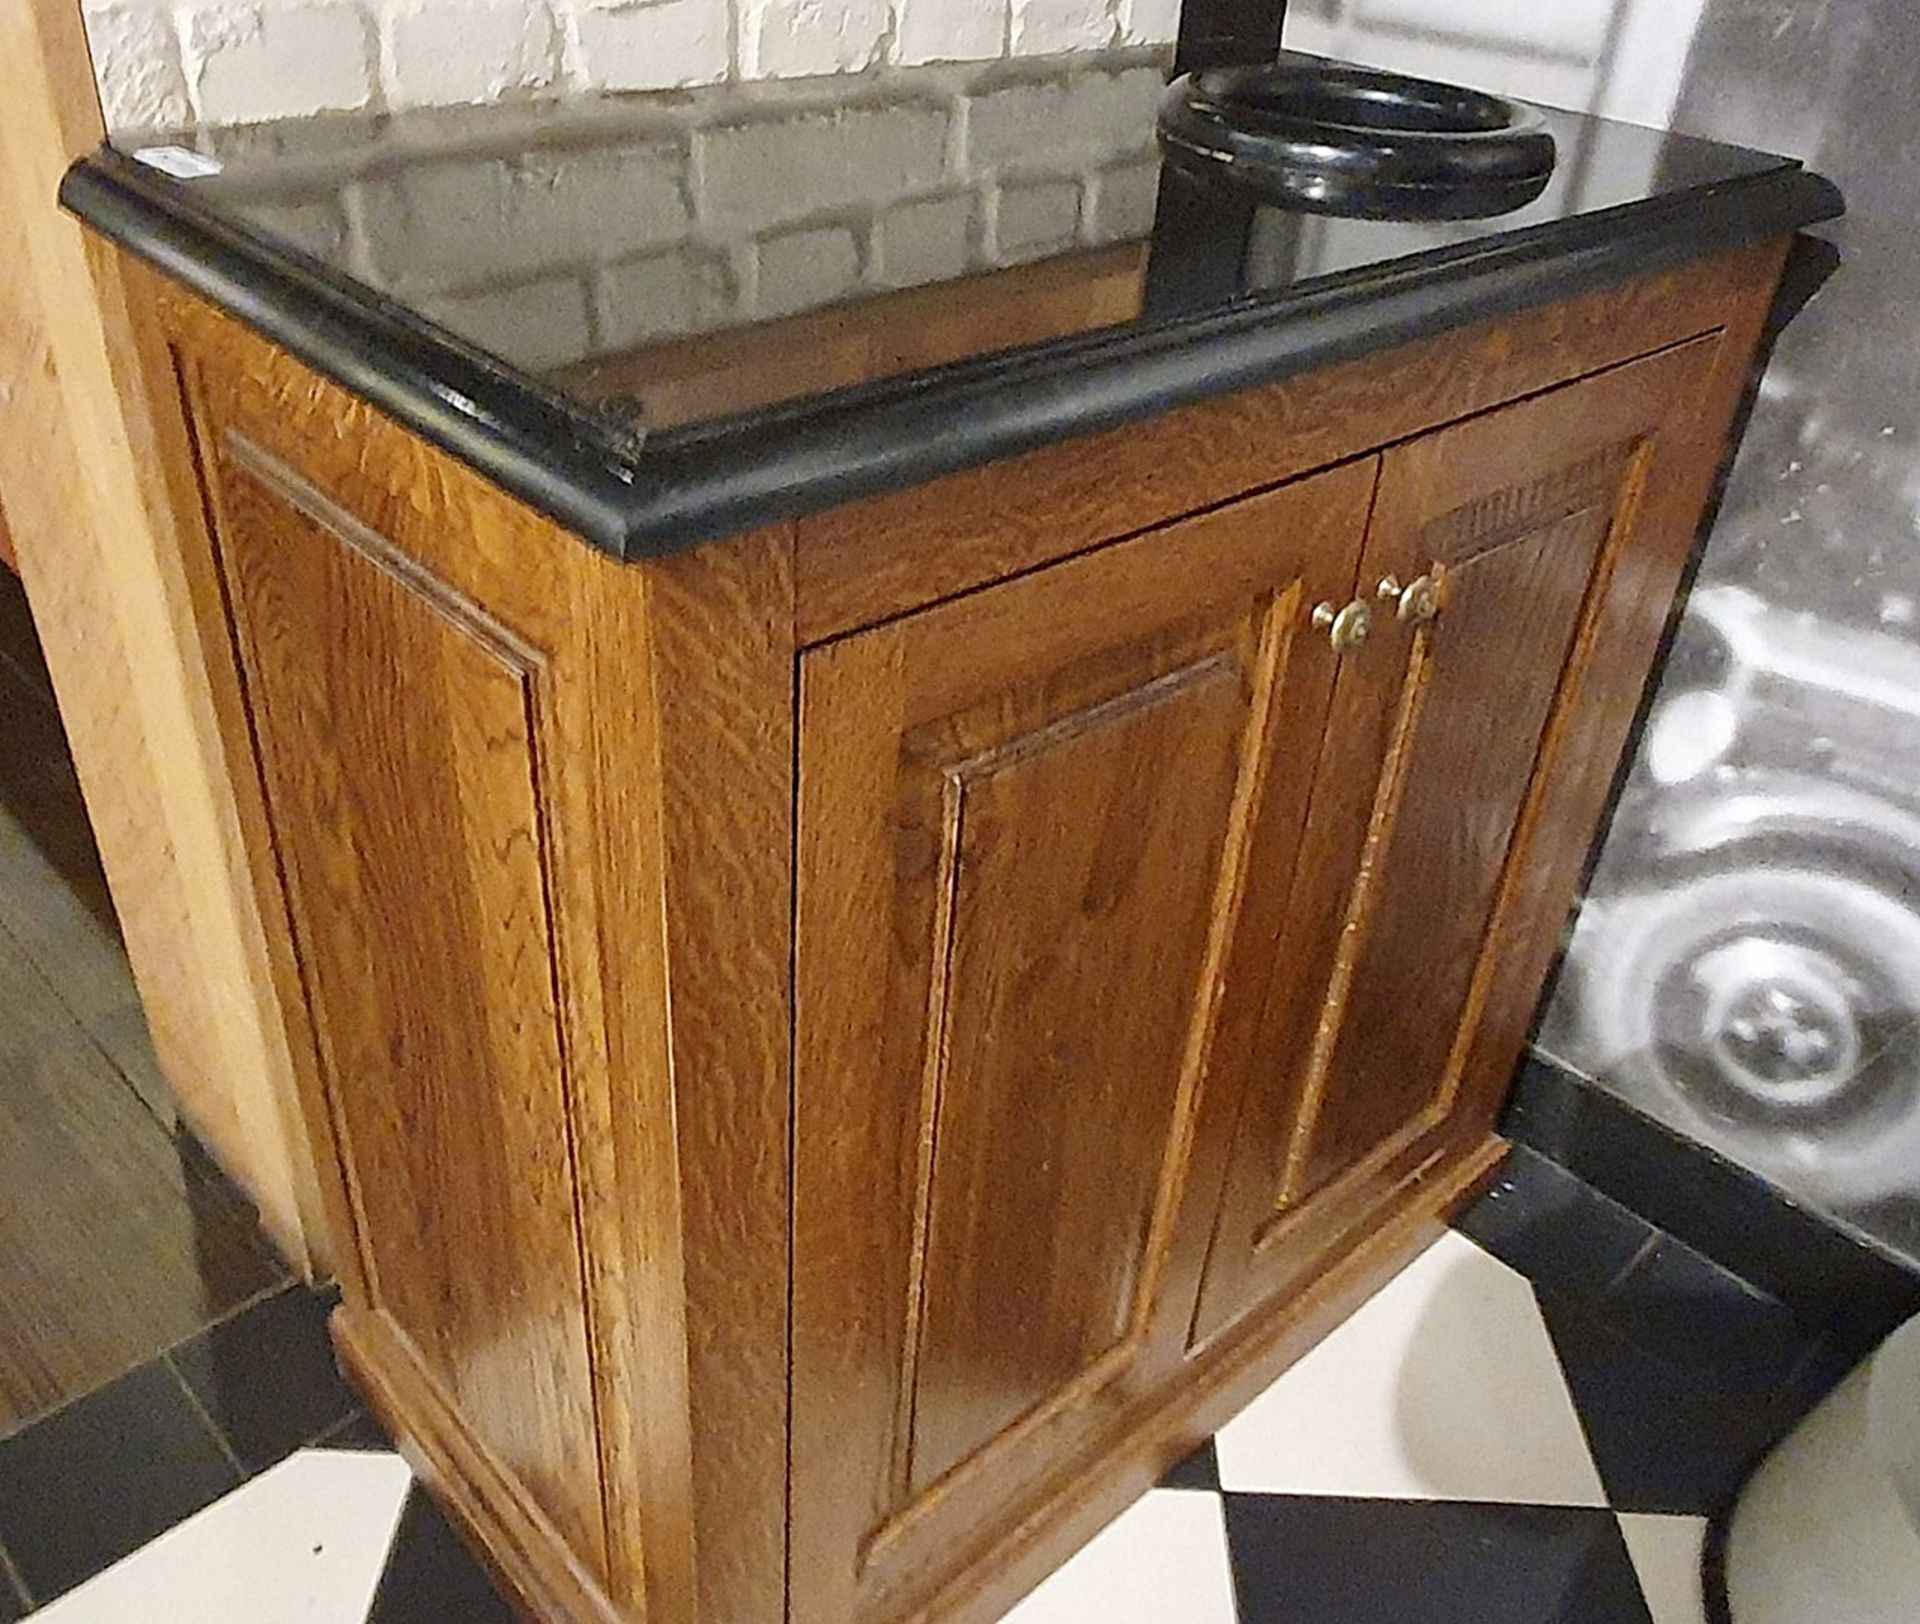 1 x Waitress / Waiter Service Cabinet in Walnut With Granite Surface and Cup Disposal Chute - H90